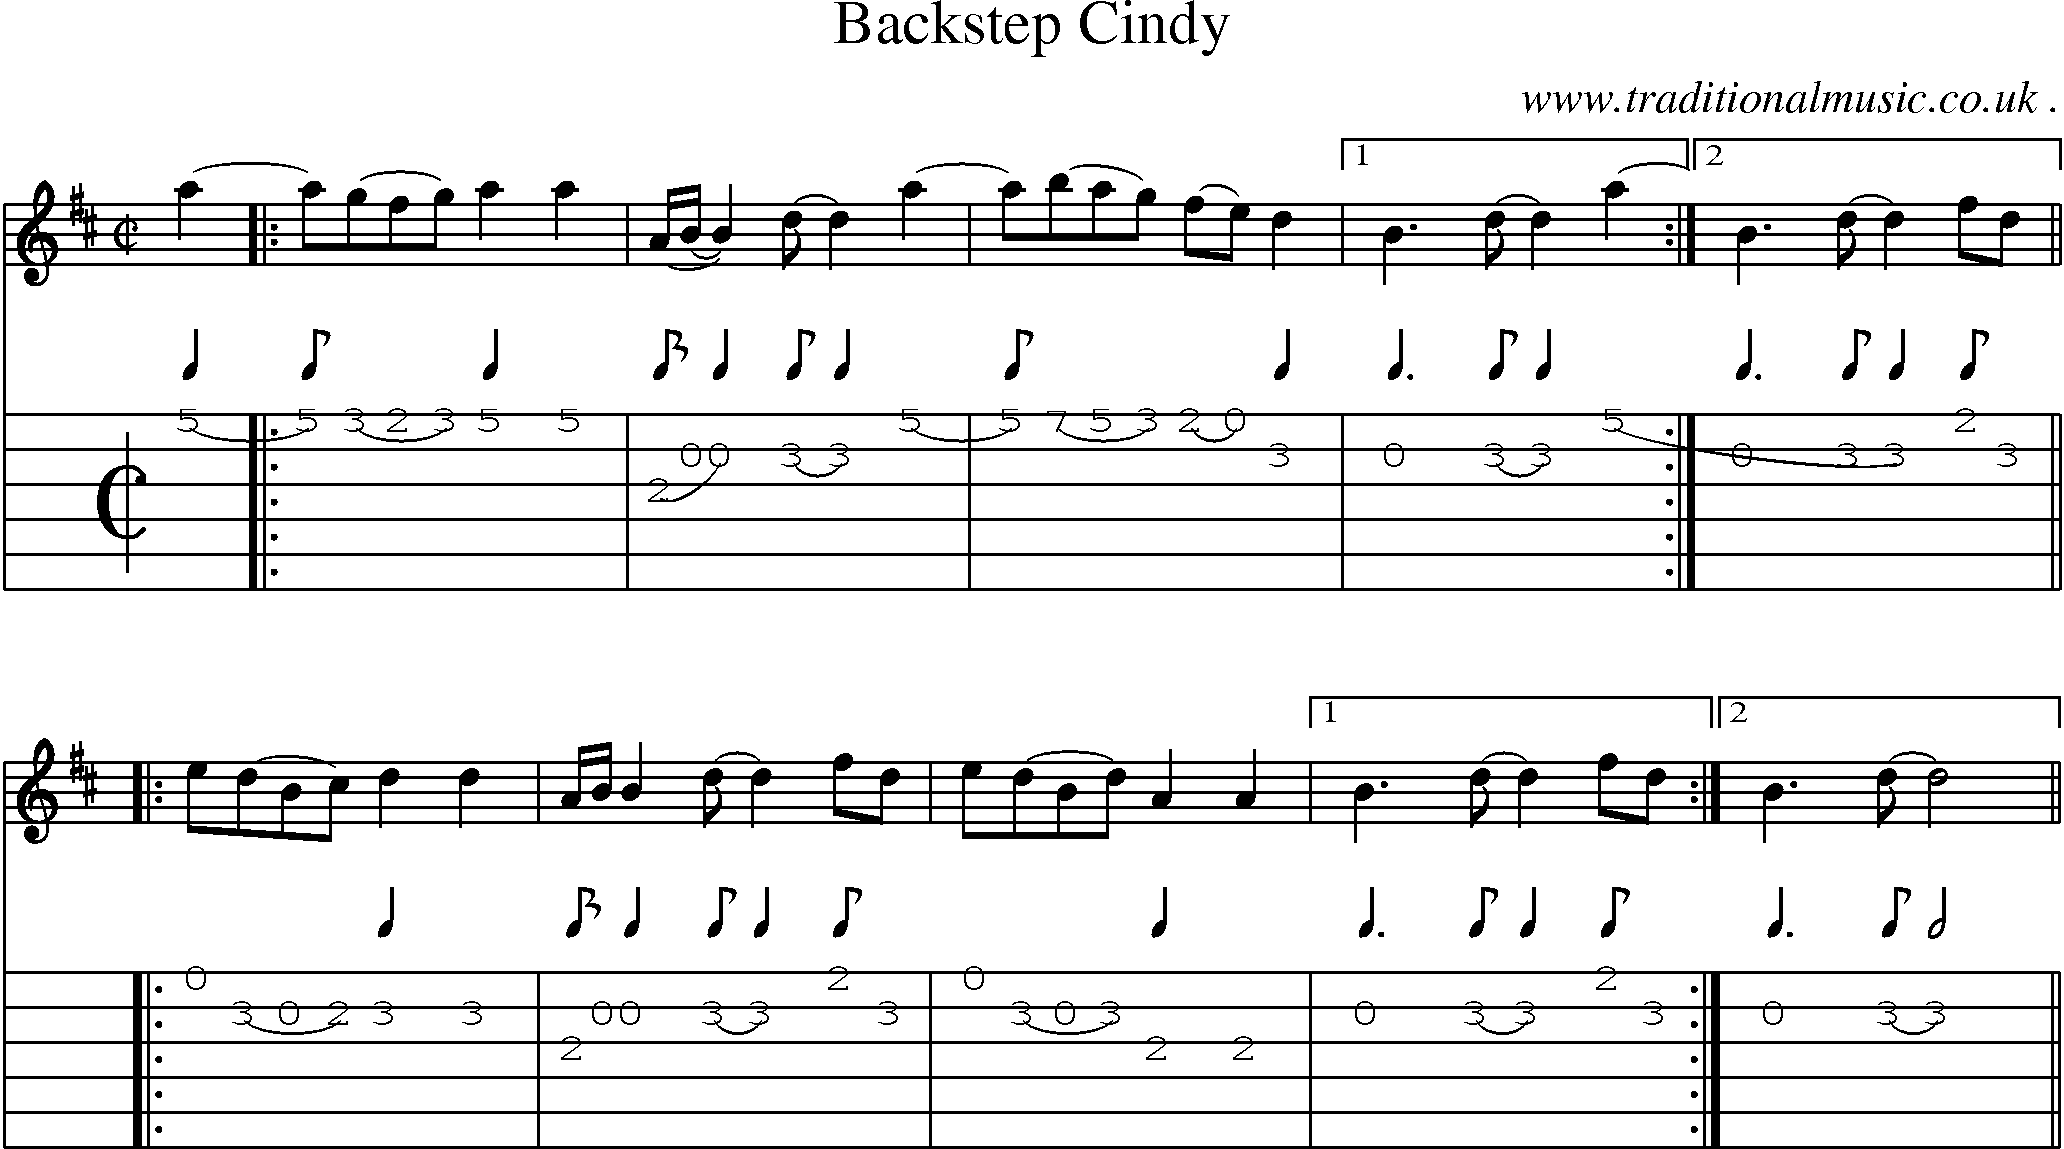 Music Score and Guitar Tabs for Backstep Cindy